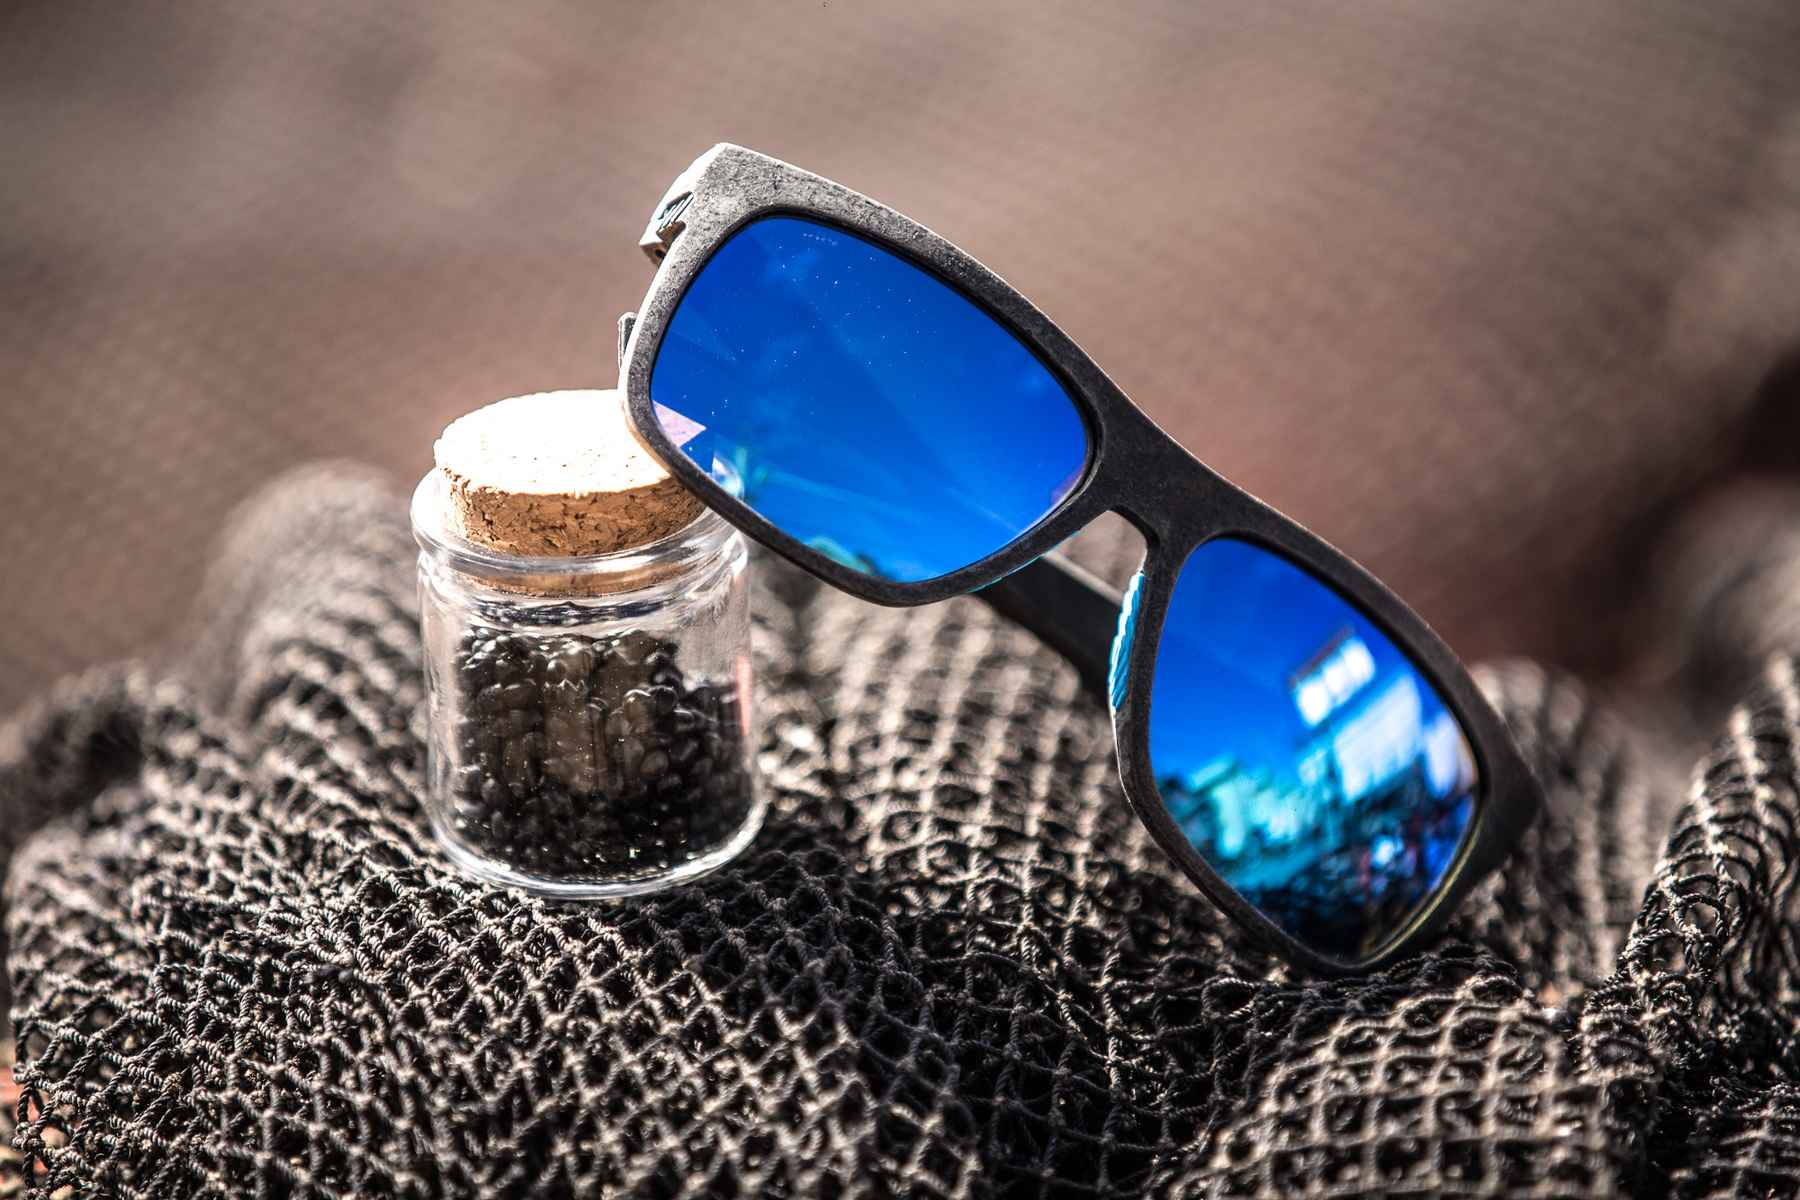 Costa is turning discarded fishing nets into sunglasses